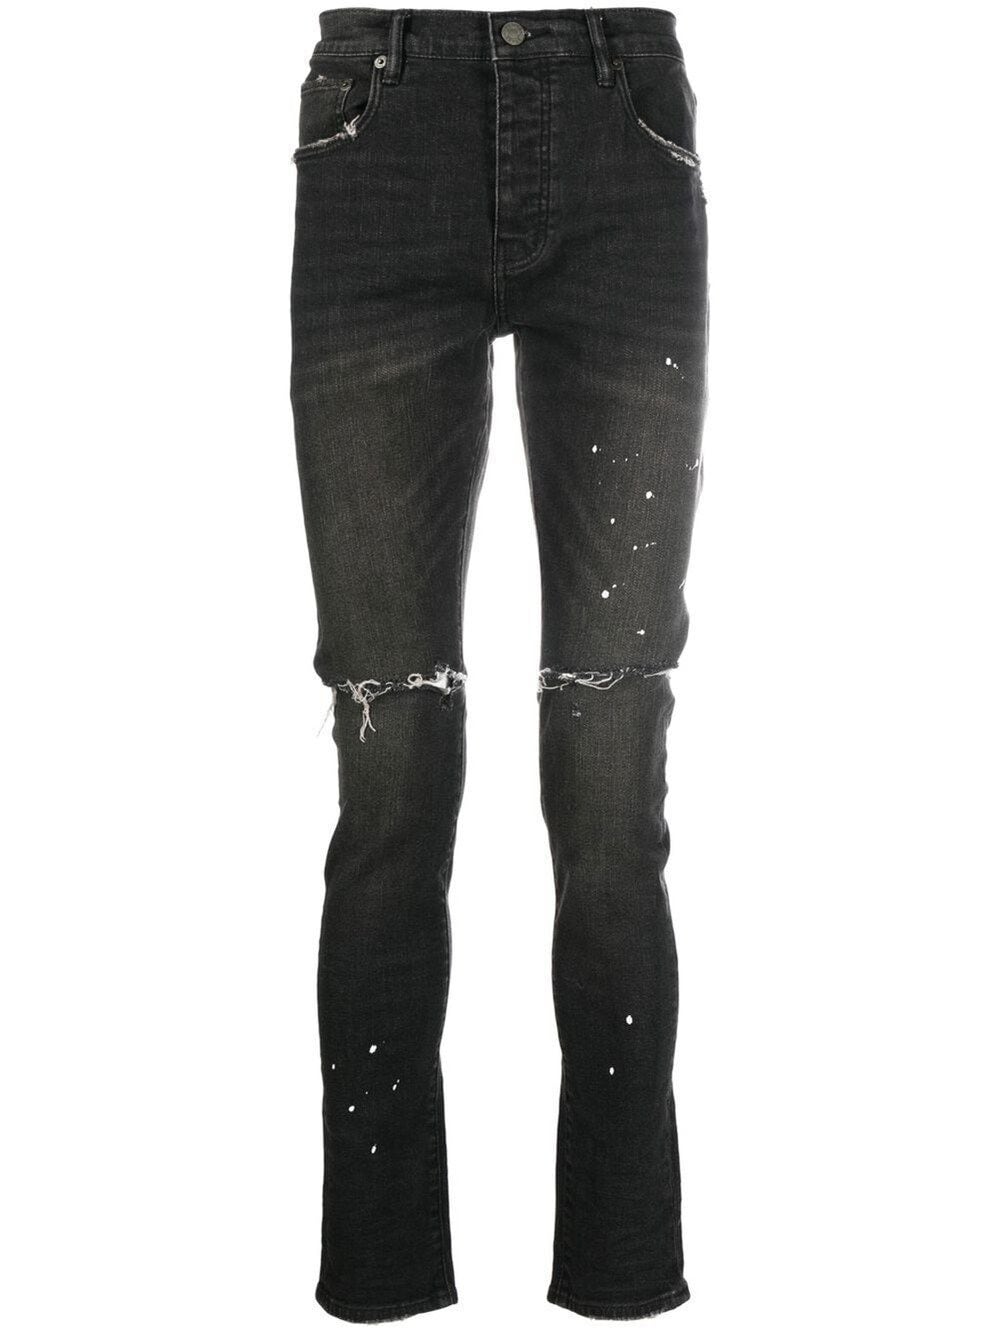 distressed ripped knee jeans | Purple Brand 